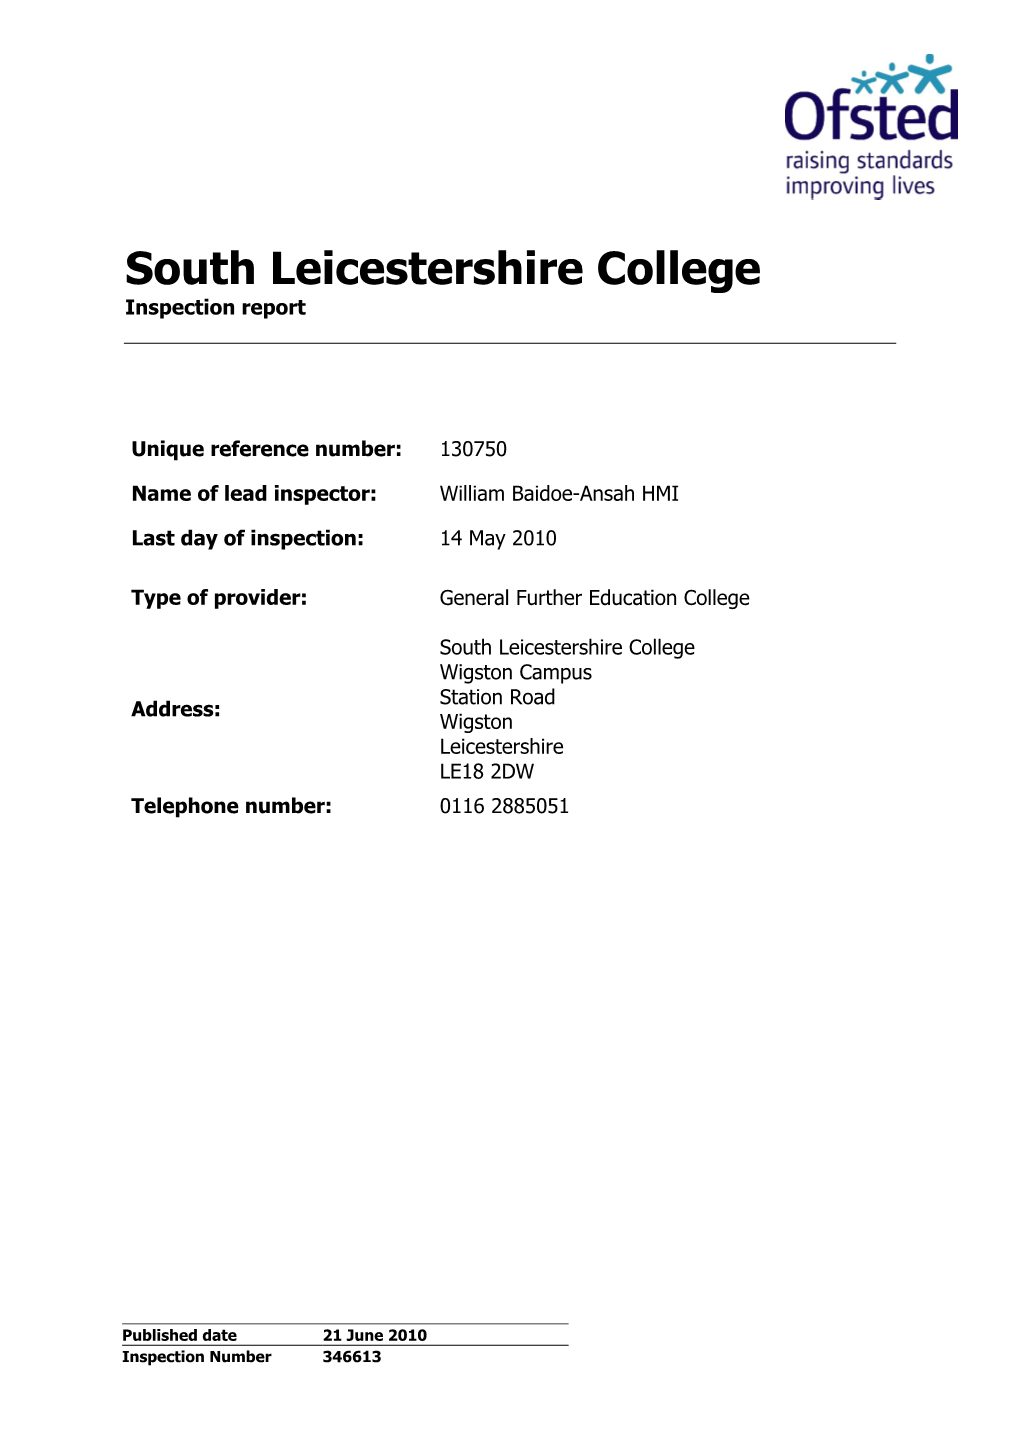 South Leicestershire College Inspection Report